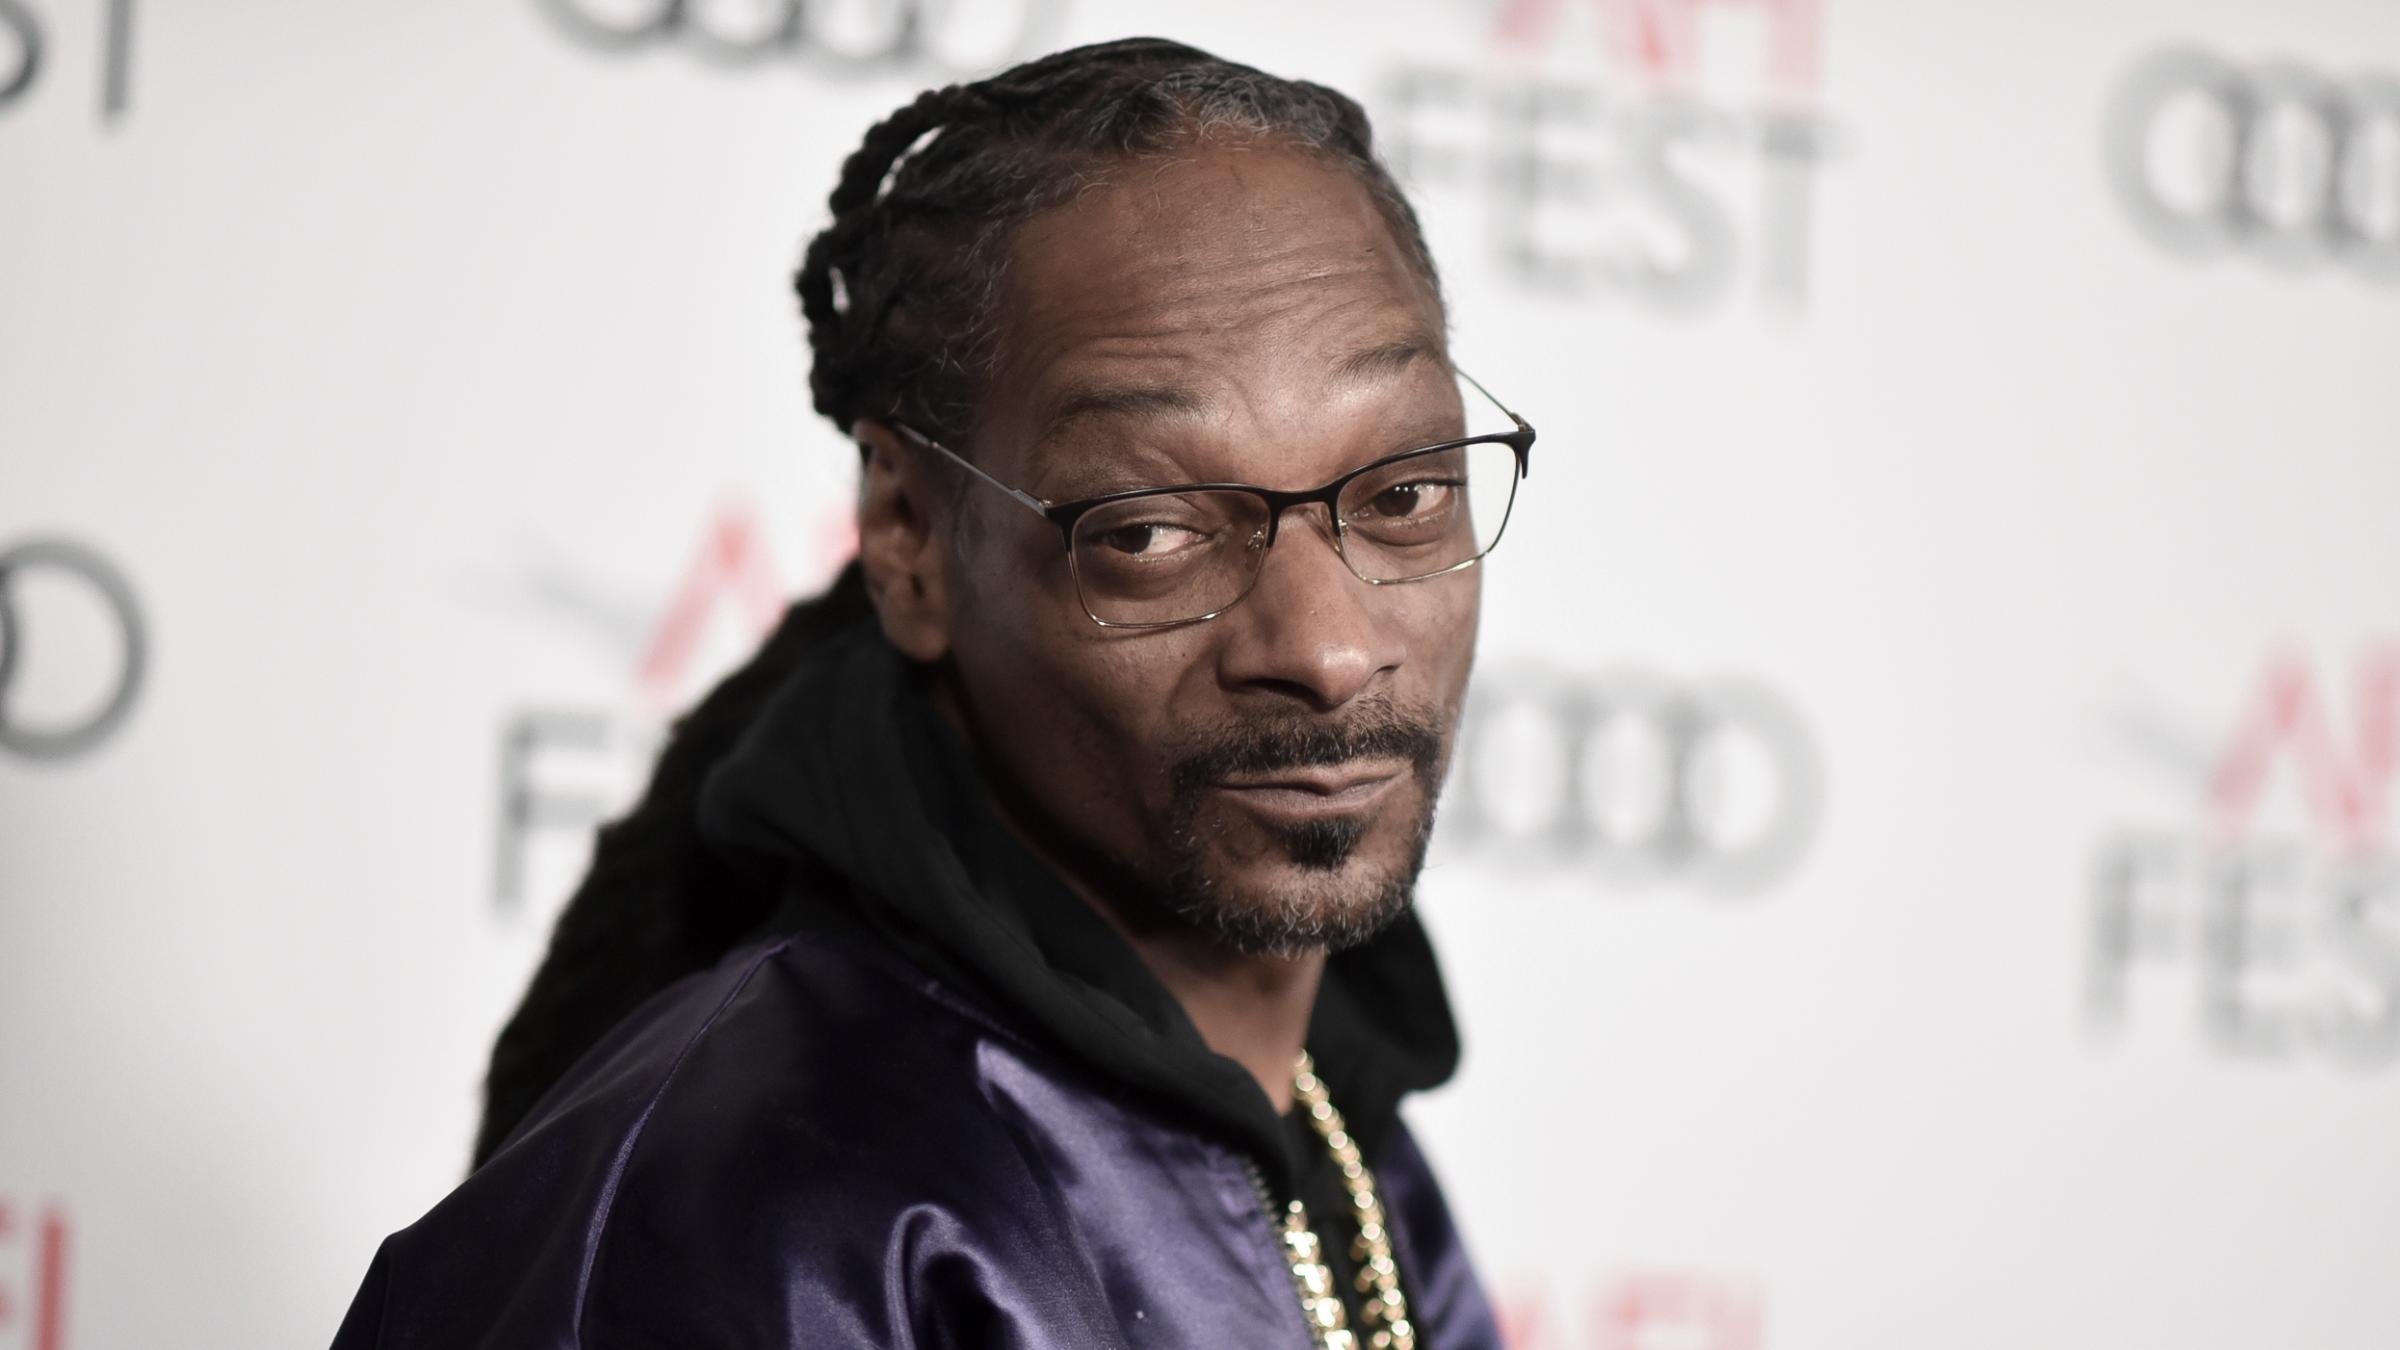 Snoop Dogg is Dropping a Lullaby Album - Thumbnail Image